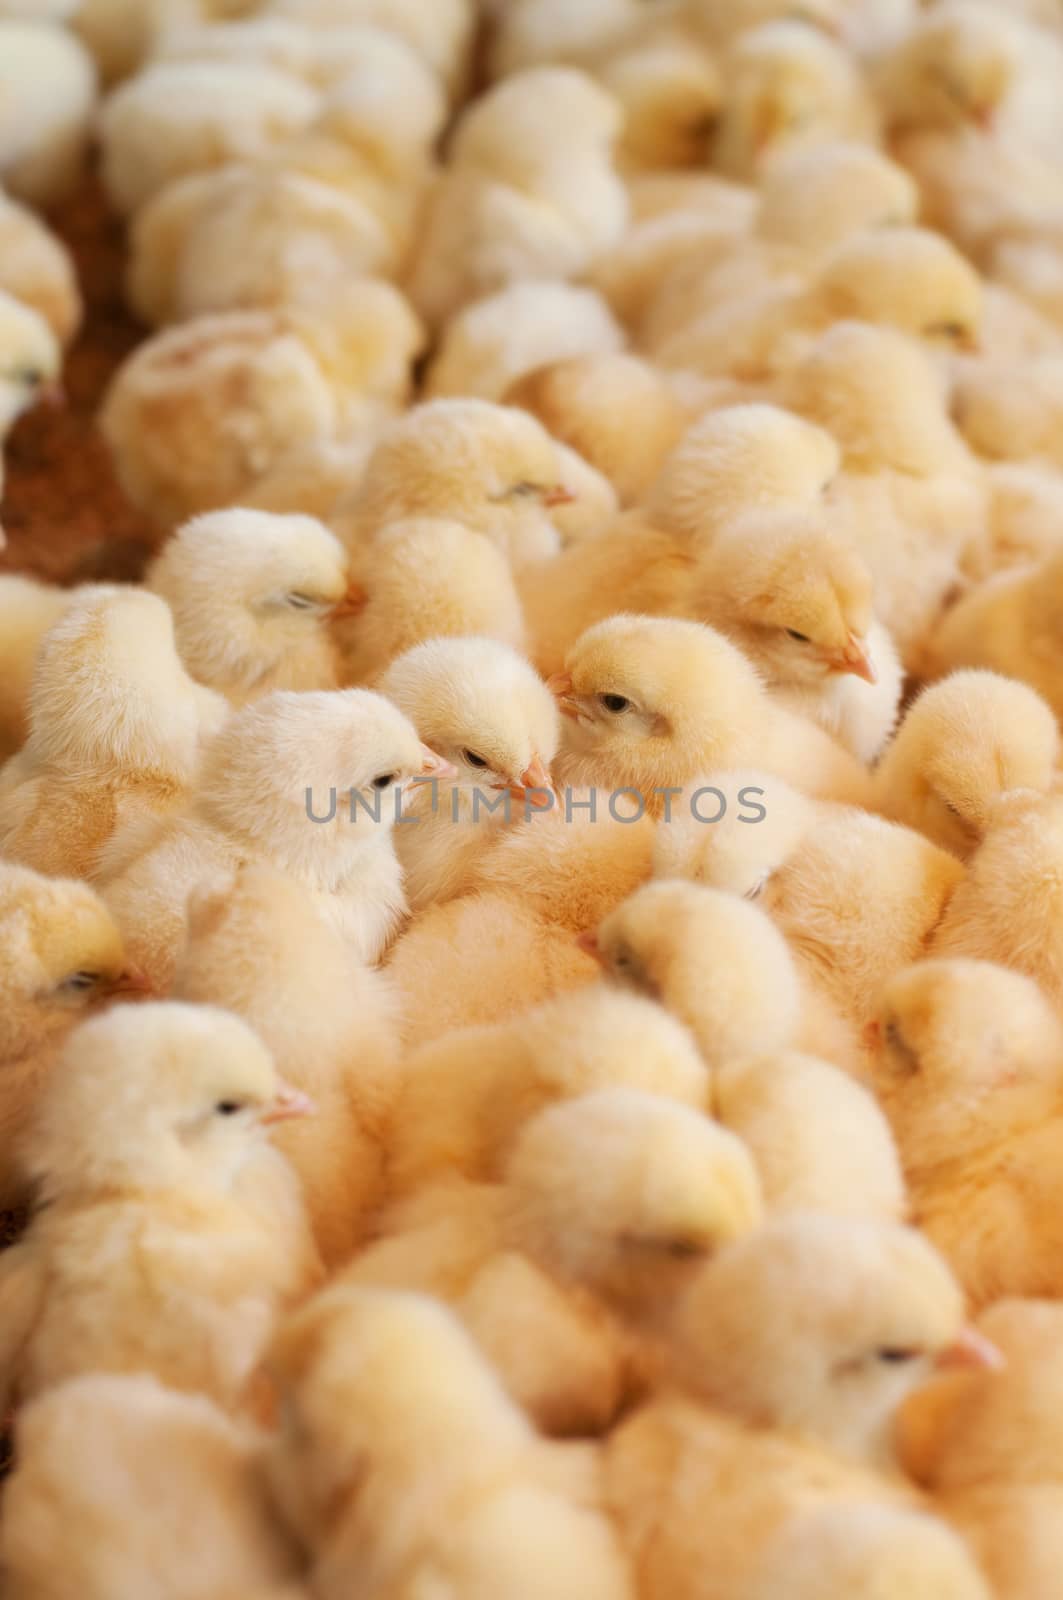 Lots of baby chicks by szefei